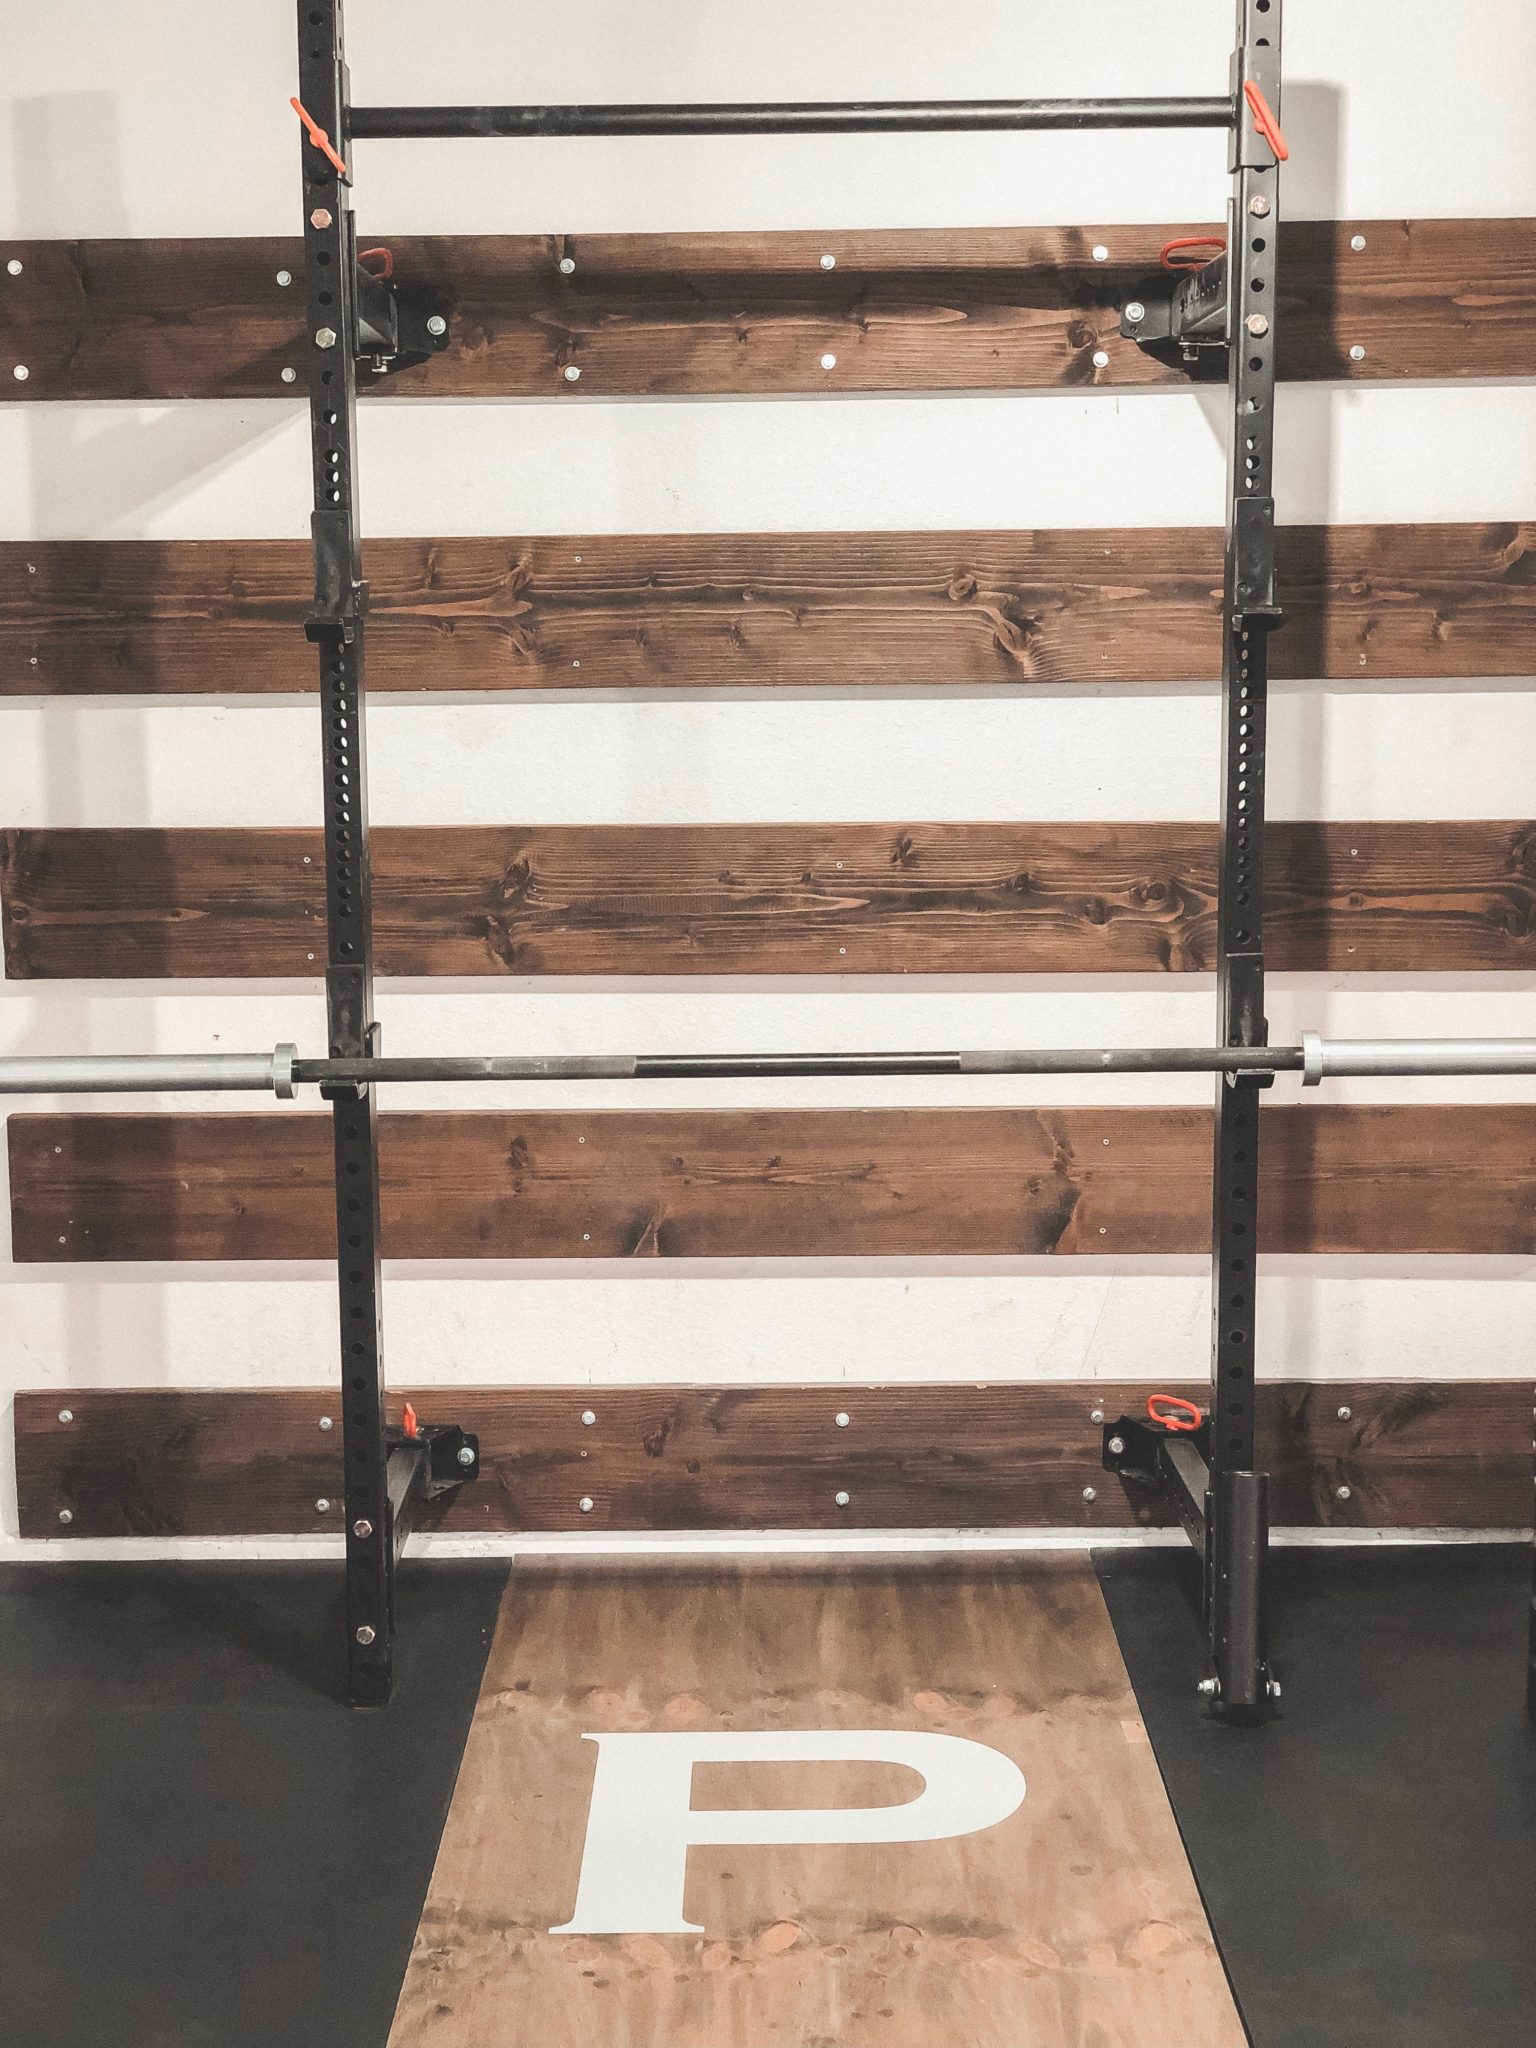 Garage Gym Ideas featured by top US lifestyle blog, Outfits & Outings